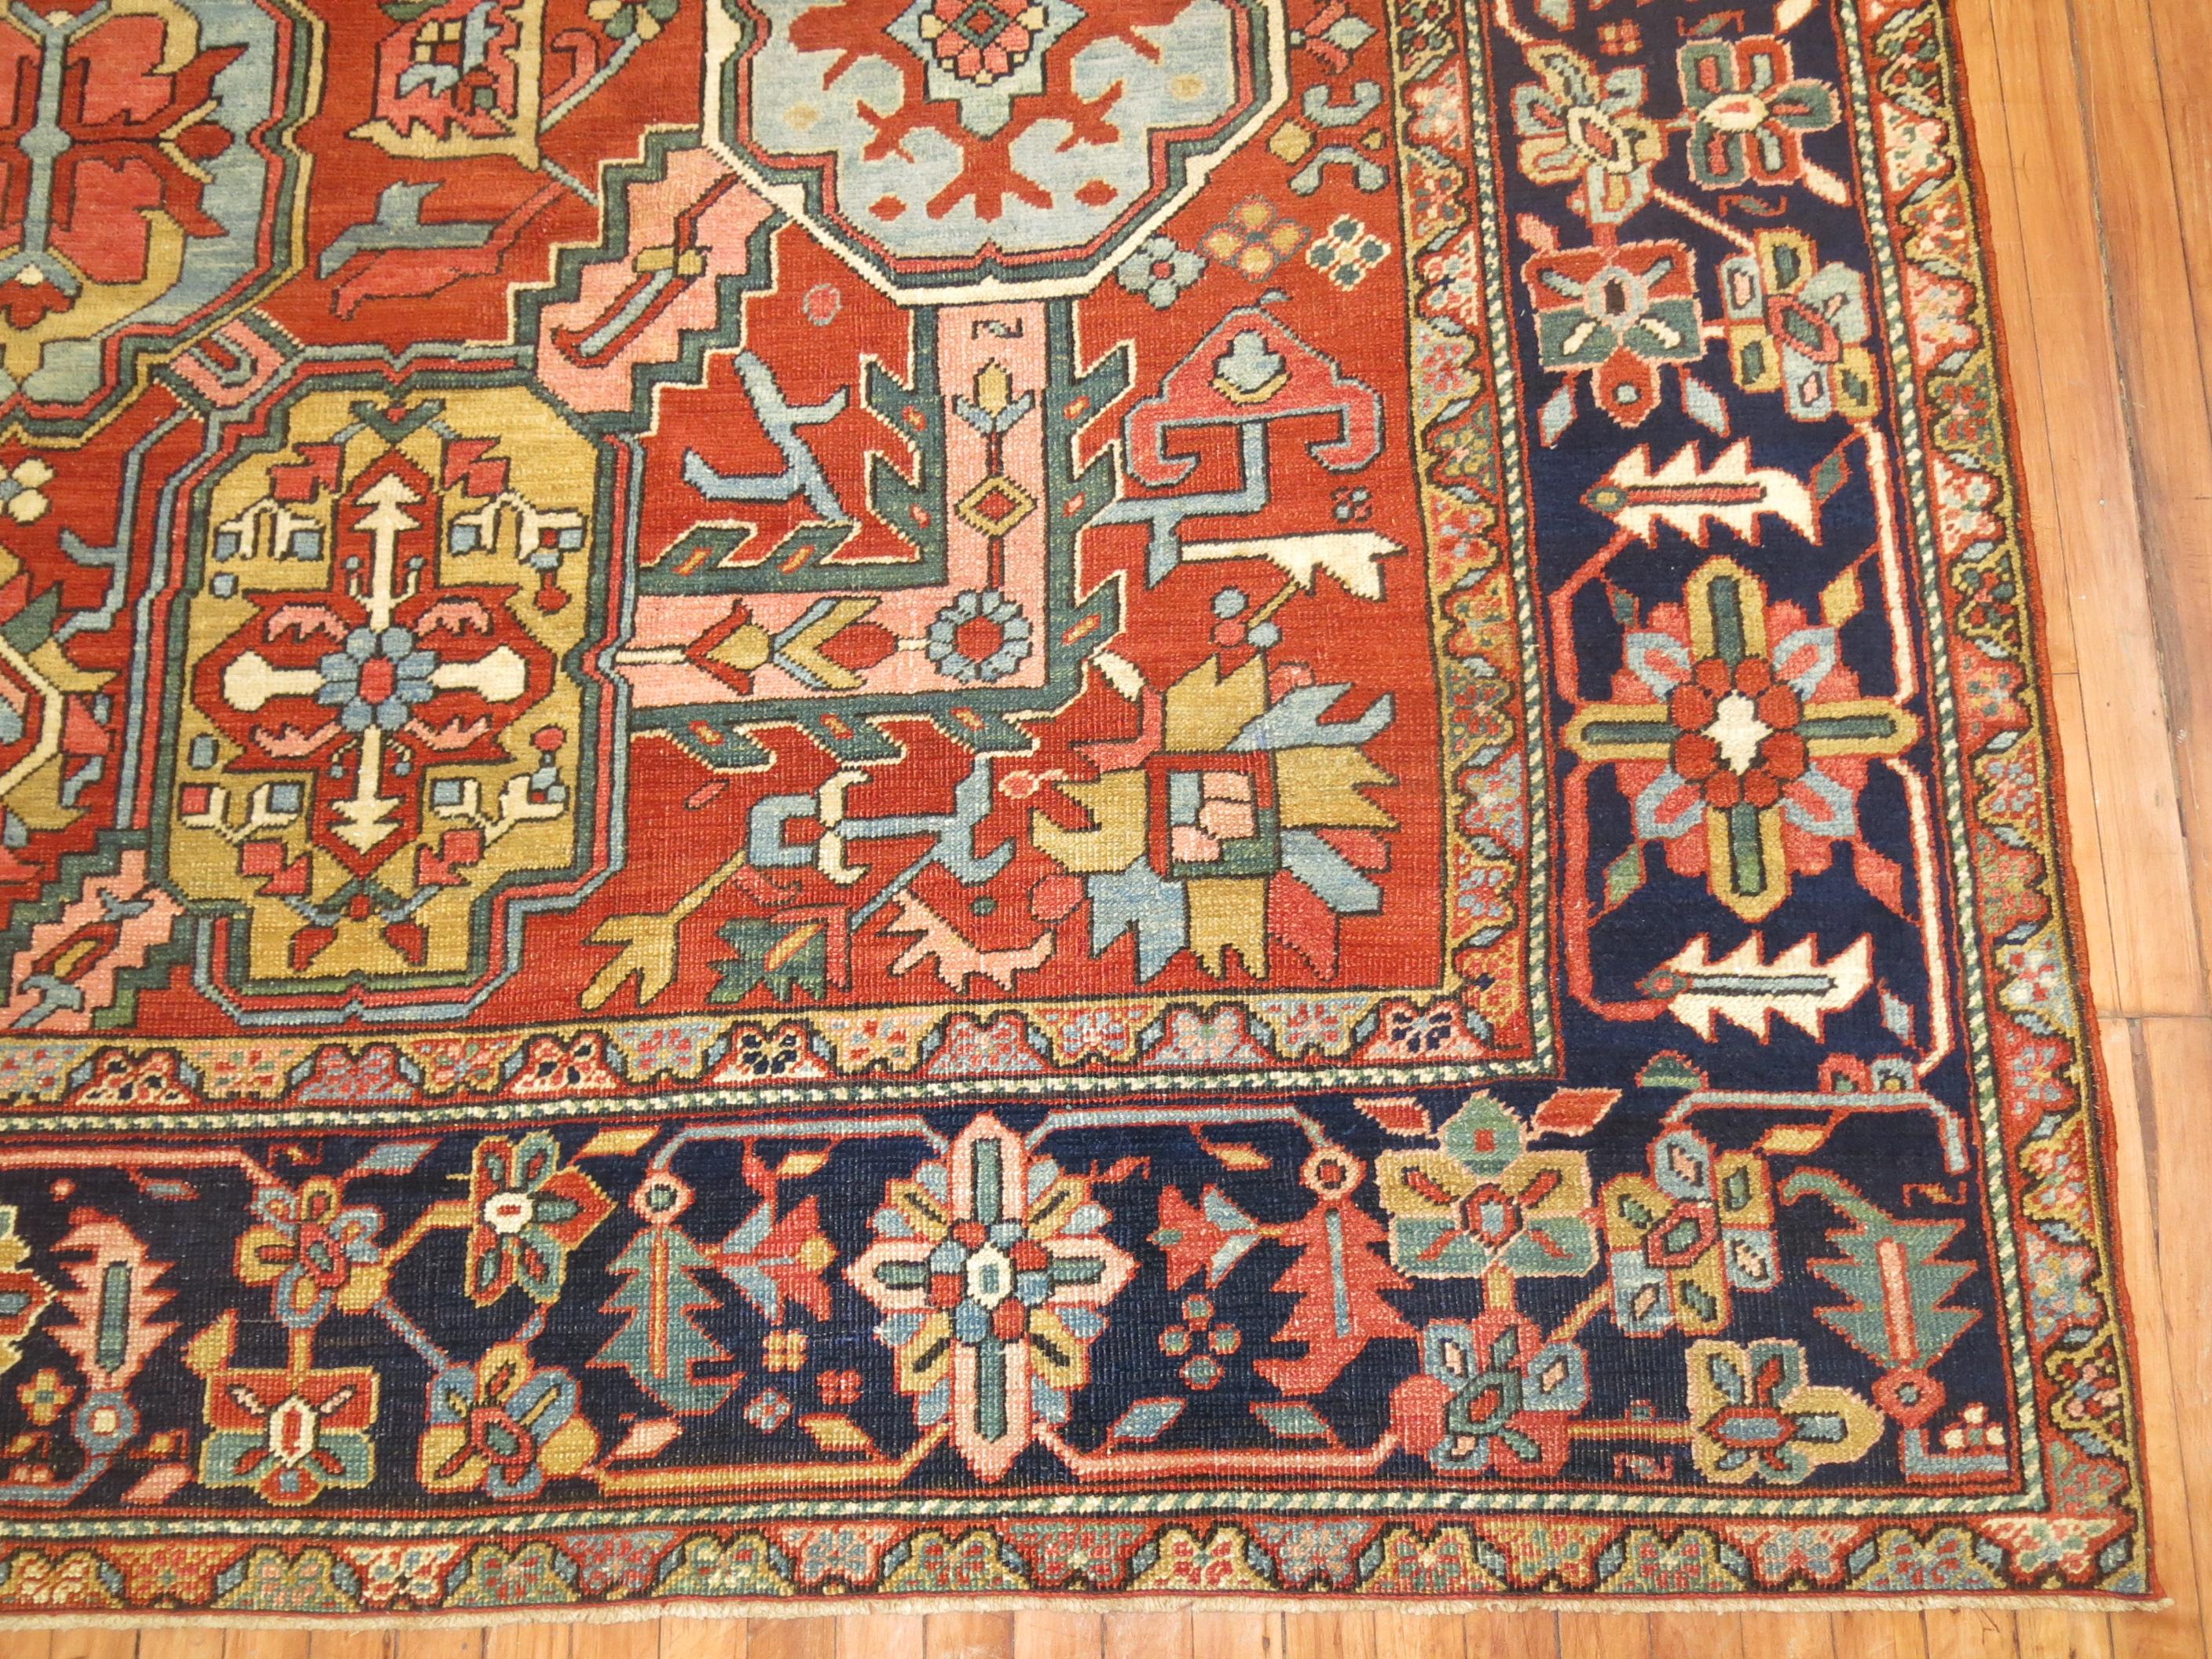 Hand-Woven Antique Persian Heriz Carpet, Early 20th Century